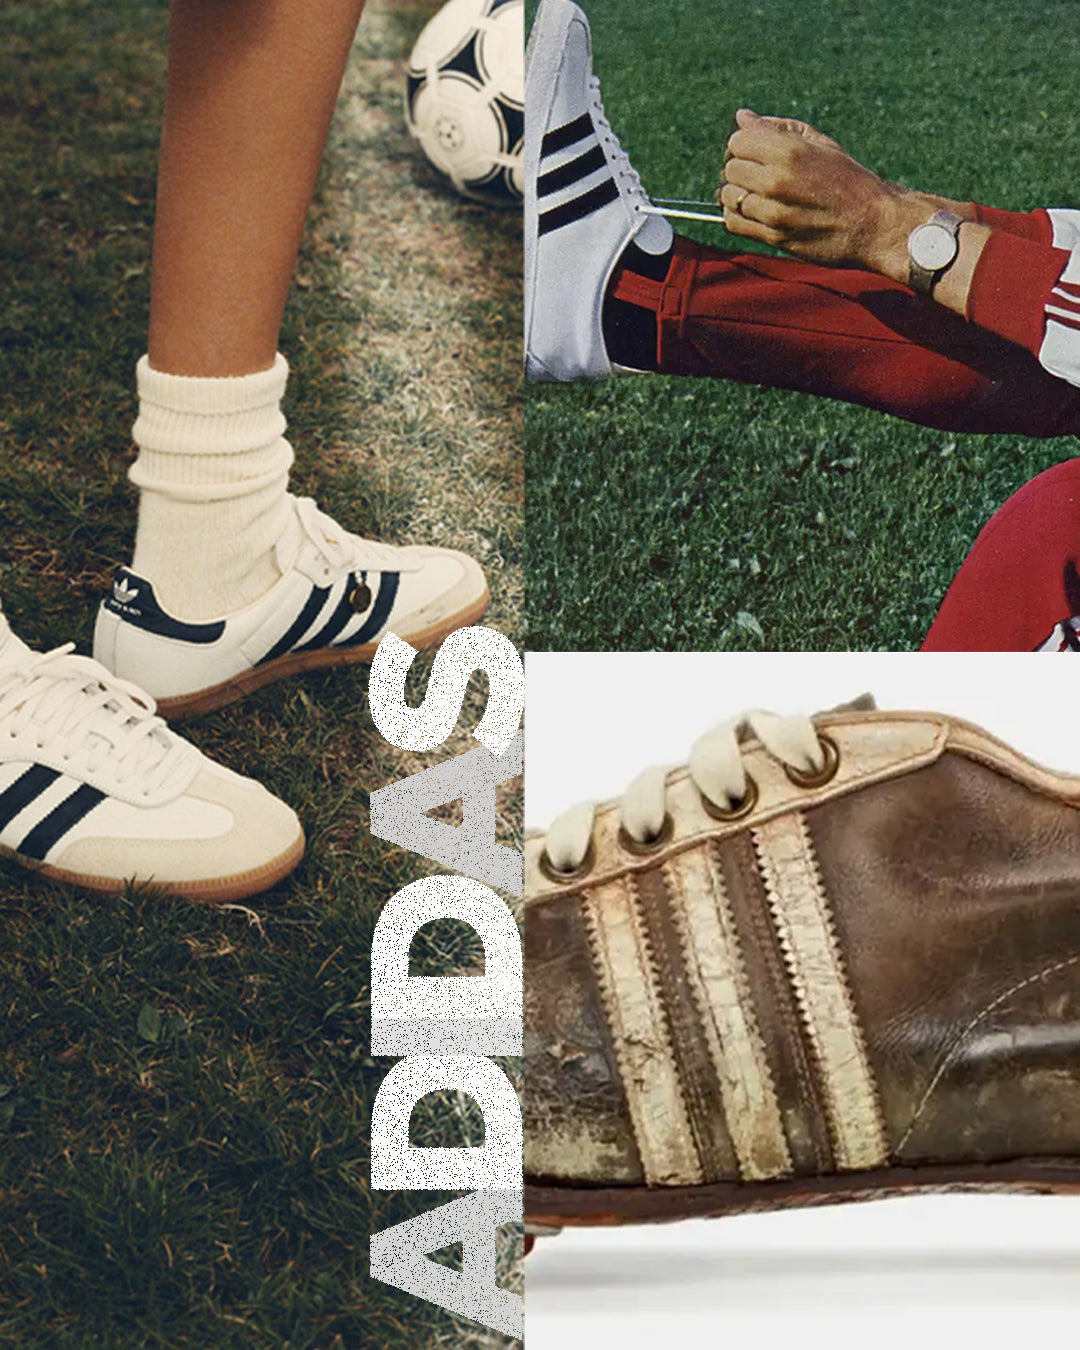 The story of 3 Stripes: Adidas card image